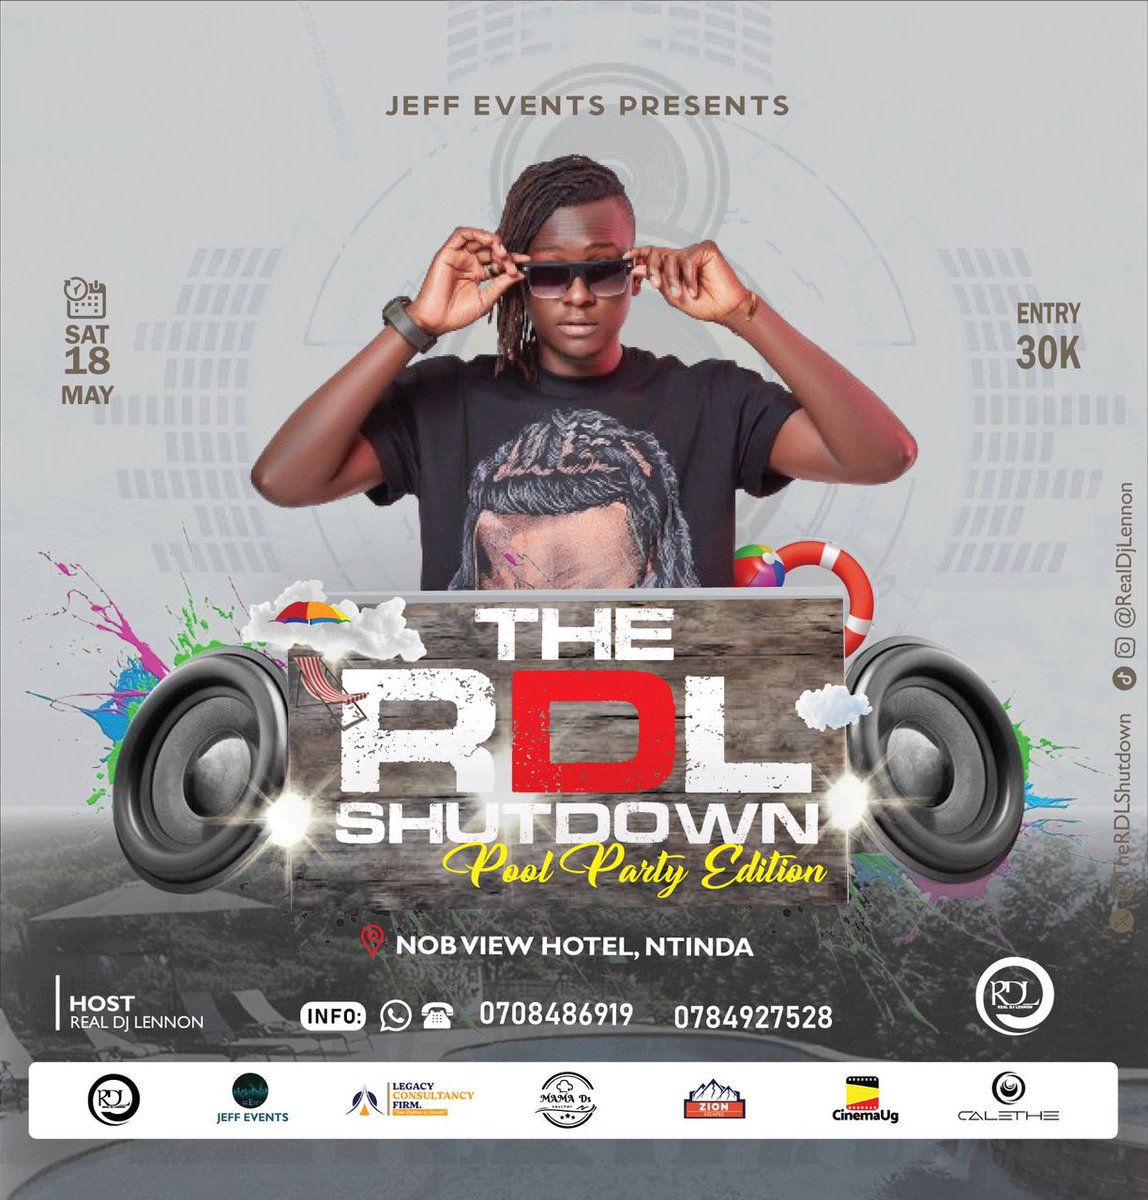 Hello my people 🎉🎉🎉🎊 Don't miss out #TheRDLShutdown happening on 18th May at Nob View Hotel. Tickets are 30K Don't miss on enjoyments ku enjoyments 💥 Vibes ku vibes 💯💥